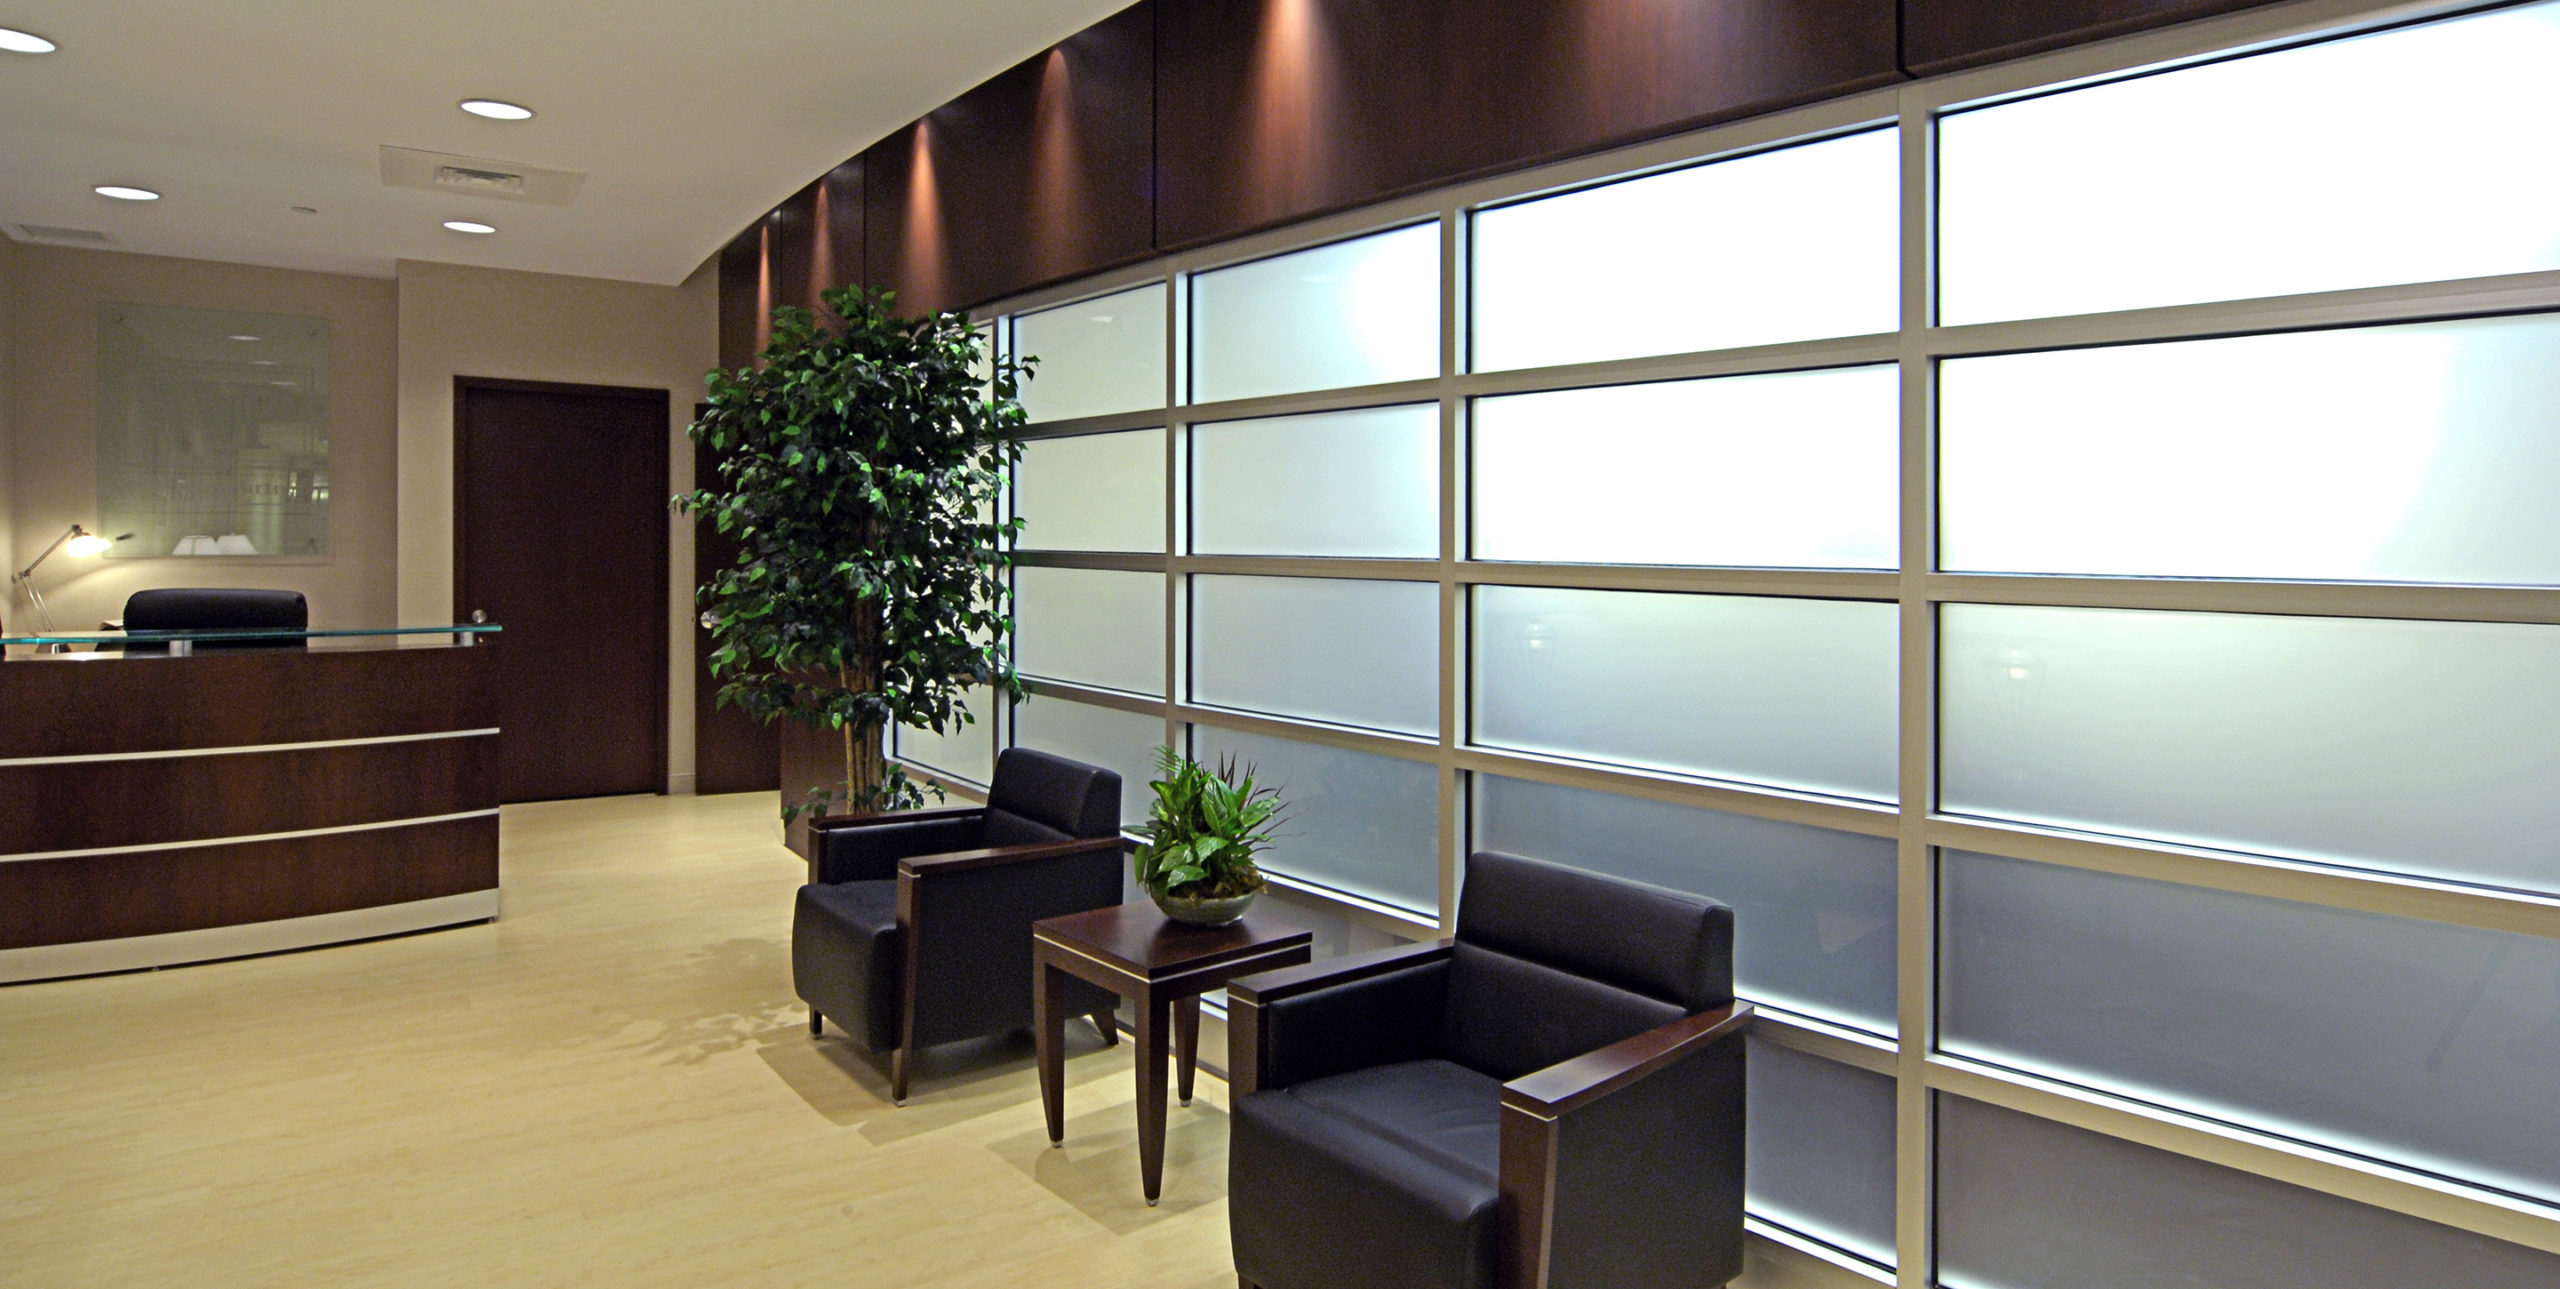 Reception desk with chairs at Westbury Partners at 100 Motor Parkway, Hauppauge